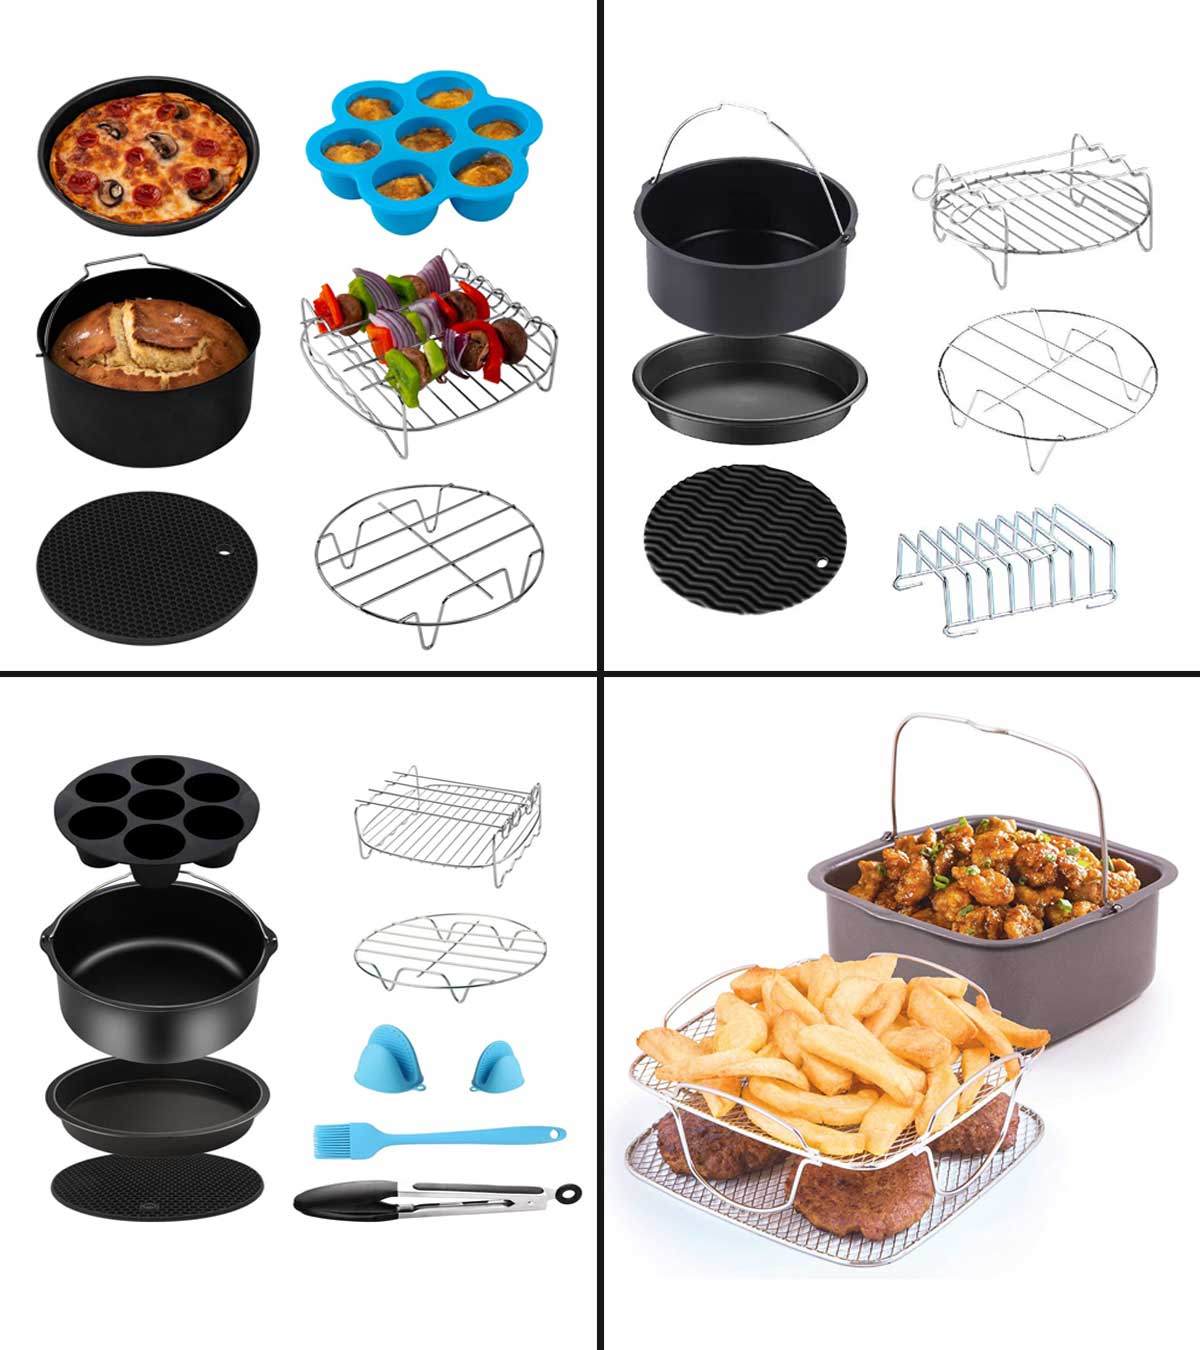 Gowise Power 1 Pizza Pan Gold 1 Silicone Mat 1 Cake Barrel 1 Skewer Rack 1 Metal holder 5 in 1 Air Fryer Accessories Set Kit Compatible with all Cozyna Asixx Air Fryer Accessories Philips 